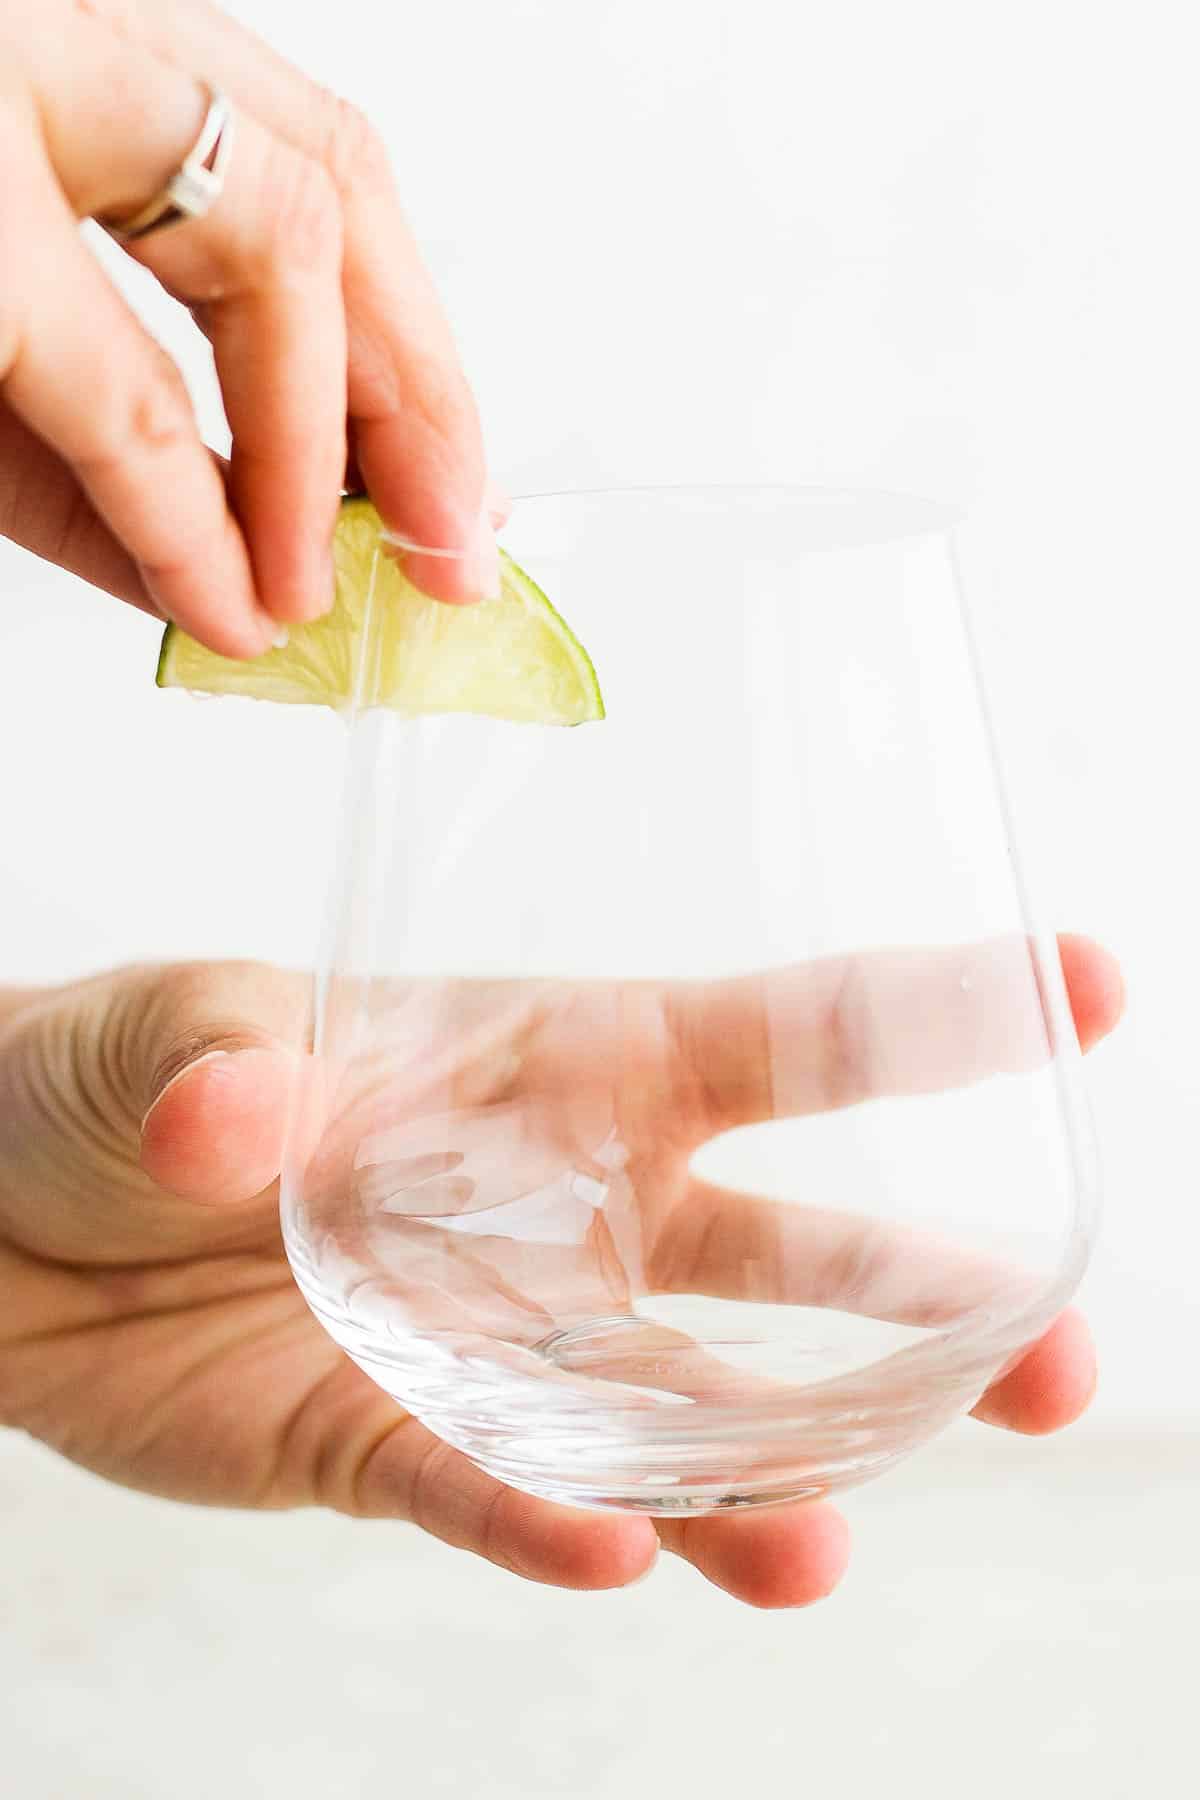 The rim of a glass being rubbed with a lime wedge.